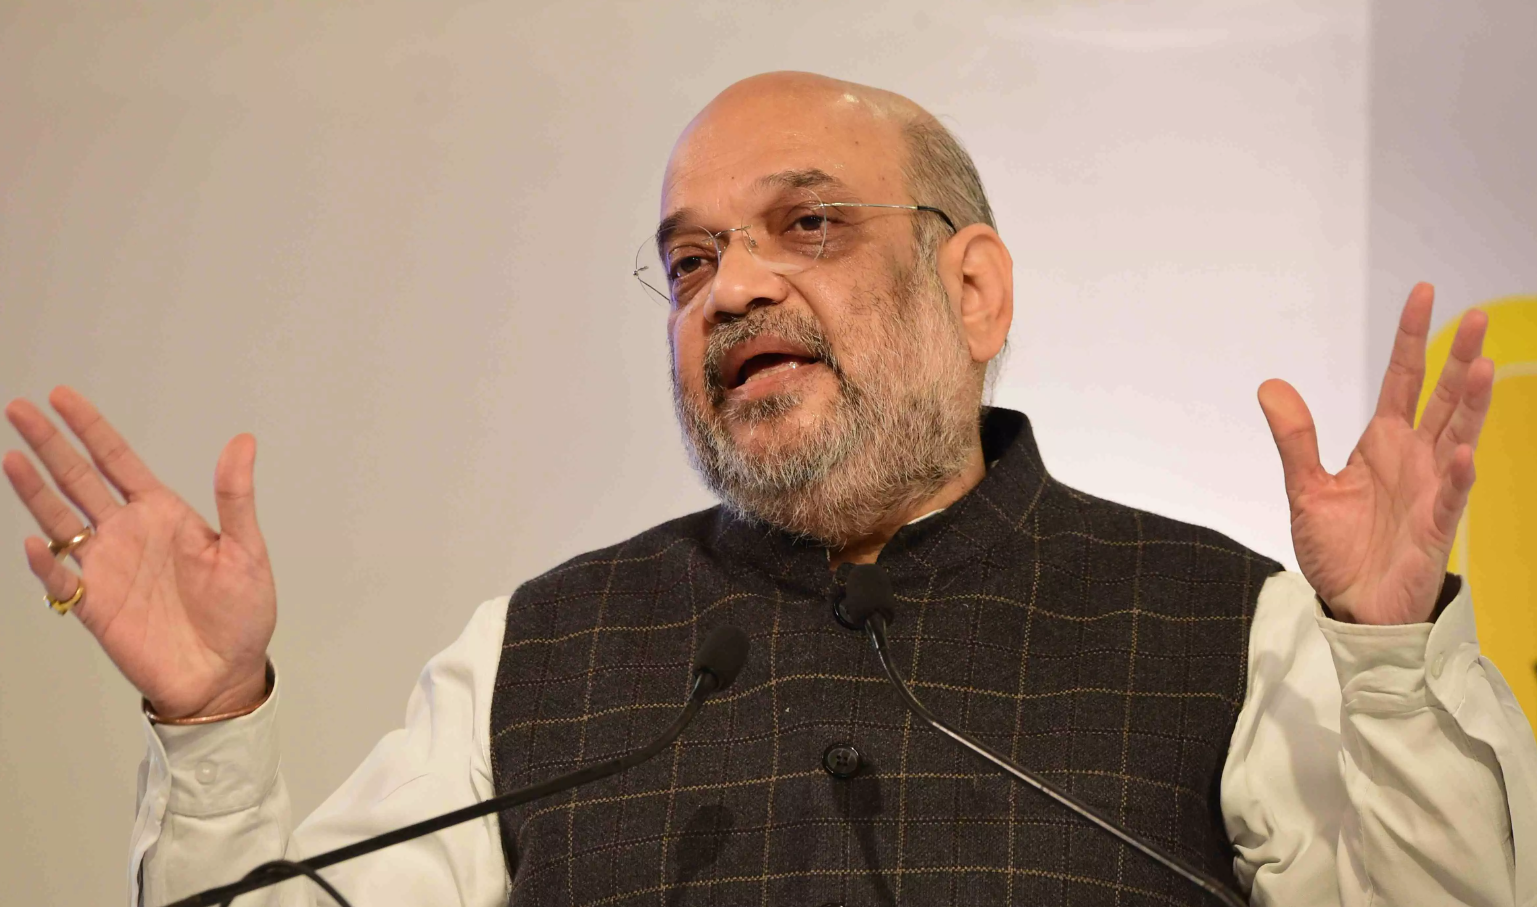 Amit Shah in Chhattisgarh: “Bhupesh Baghel a ‘pre-paid’ CM of Congress, his validity has ended”